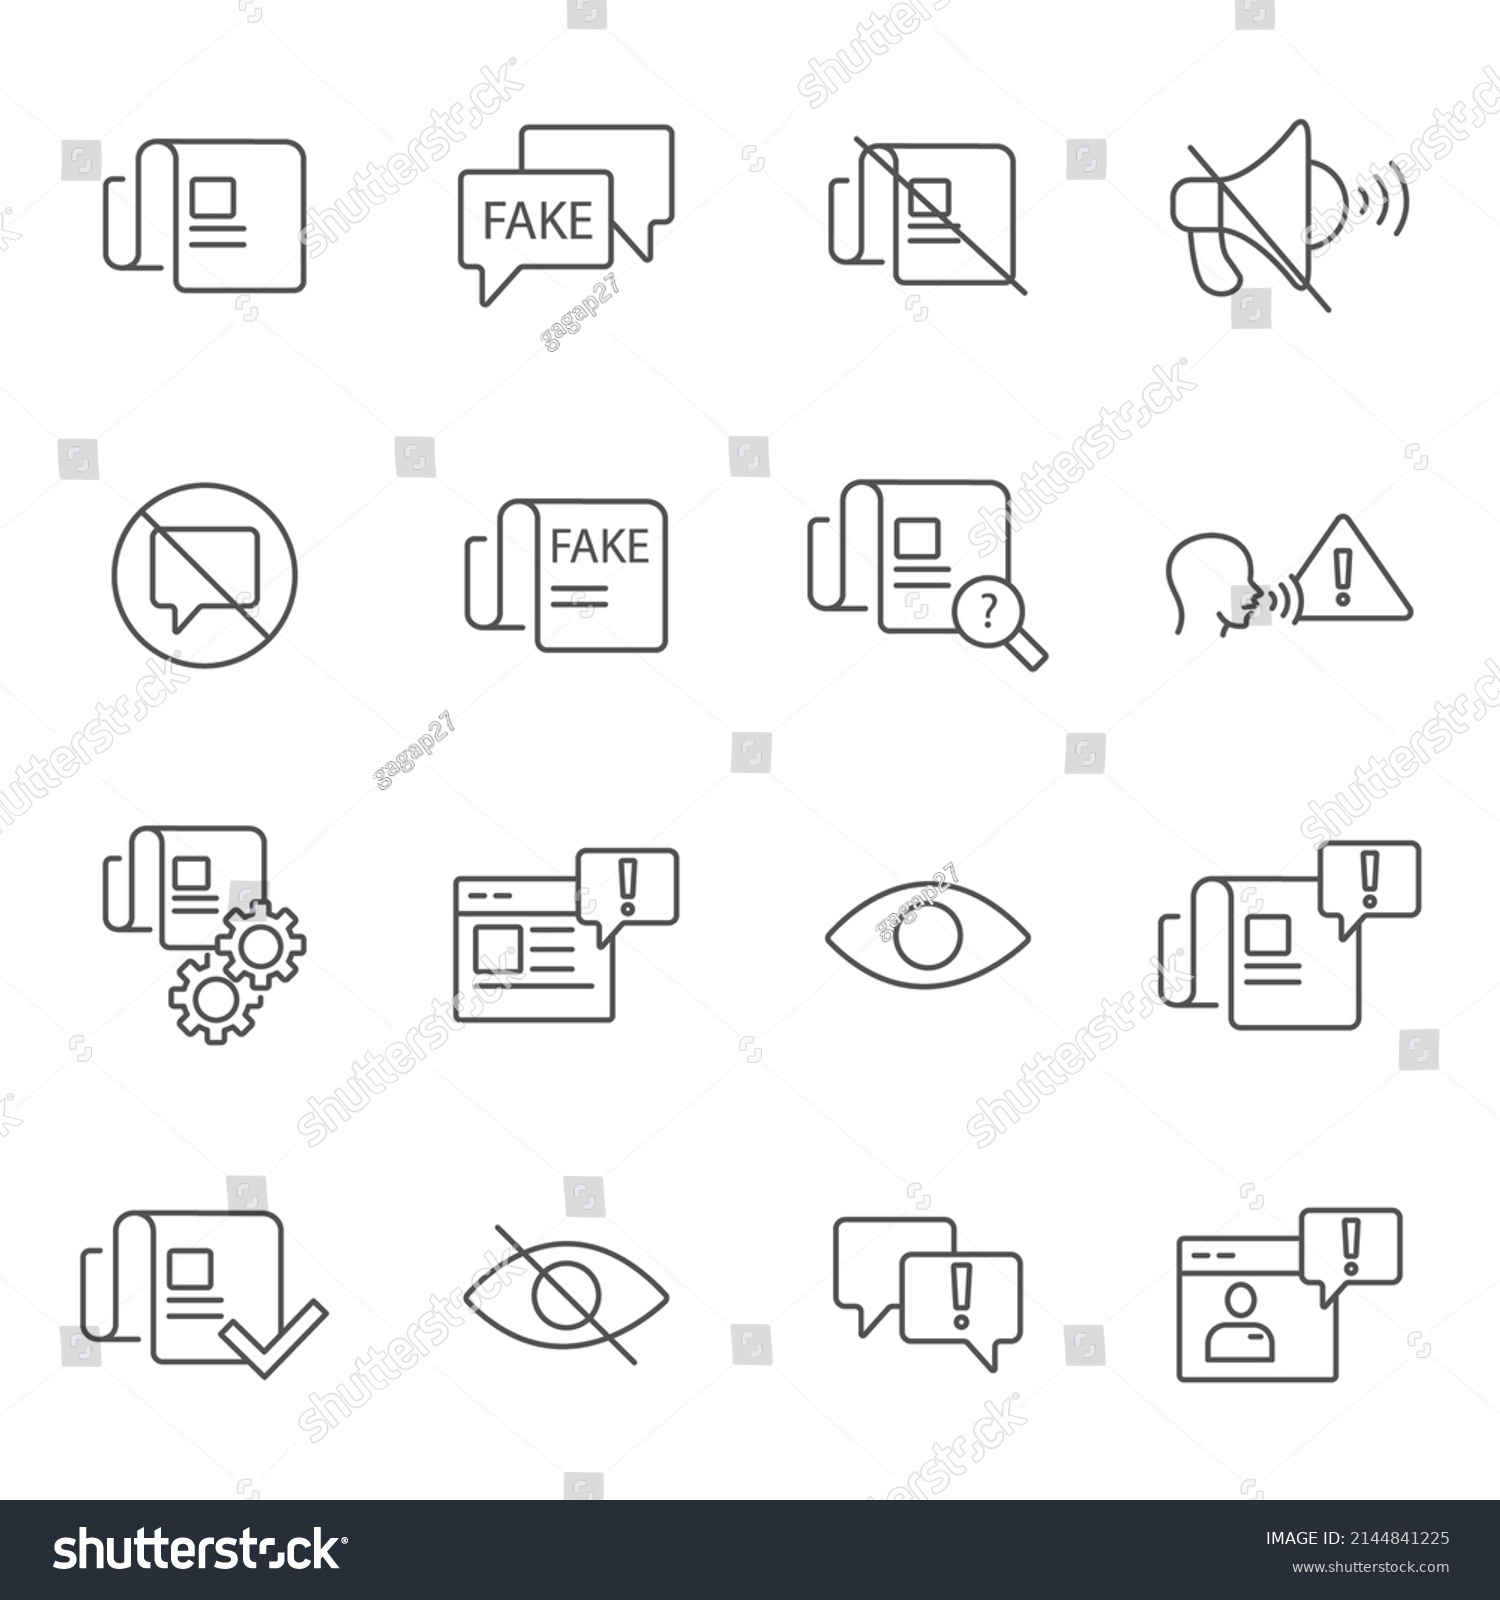 SVG of Fake News icons set . Fake News symbol vector elements for infographic web svg